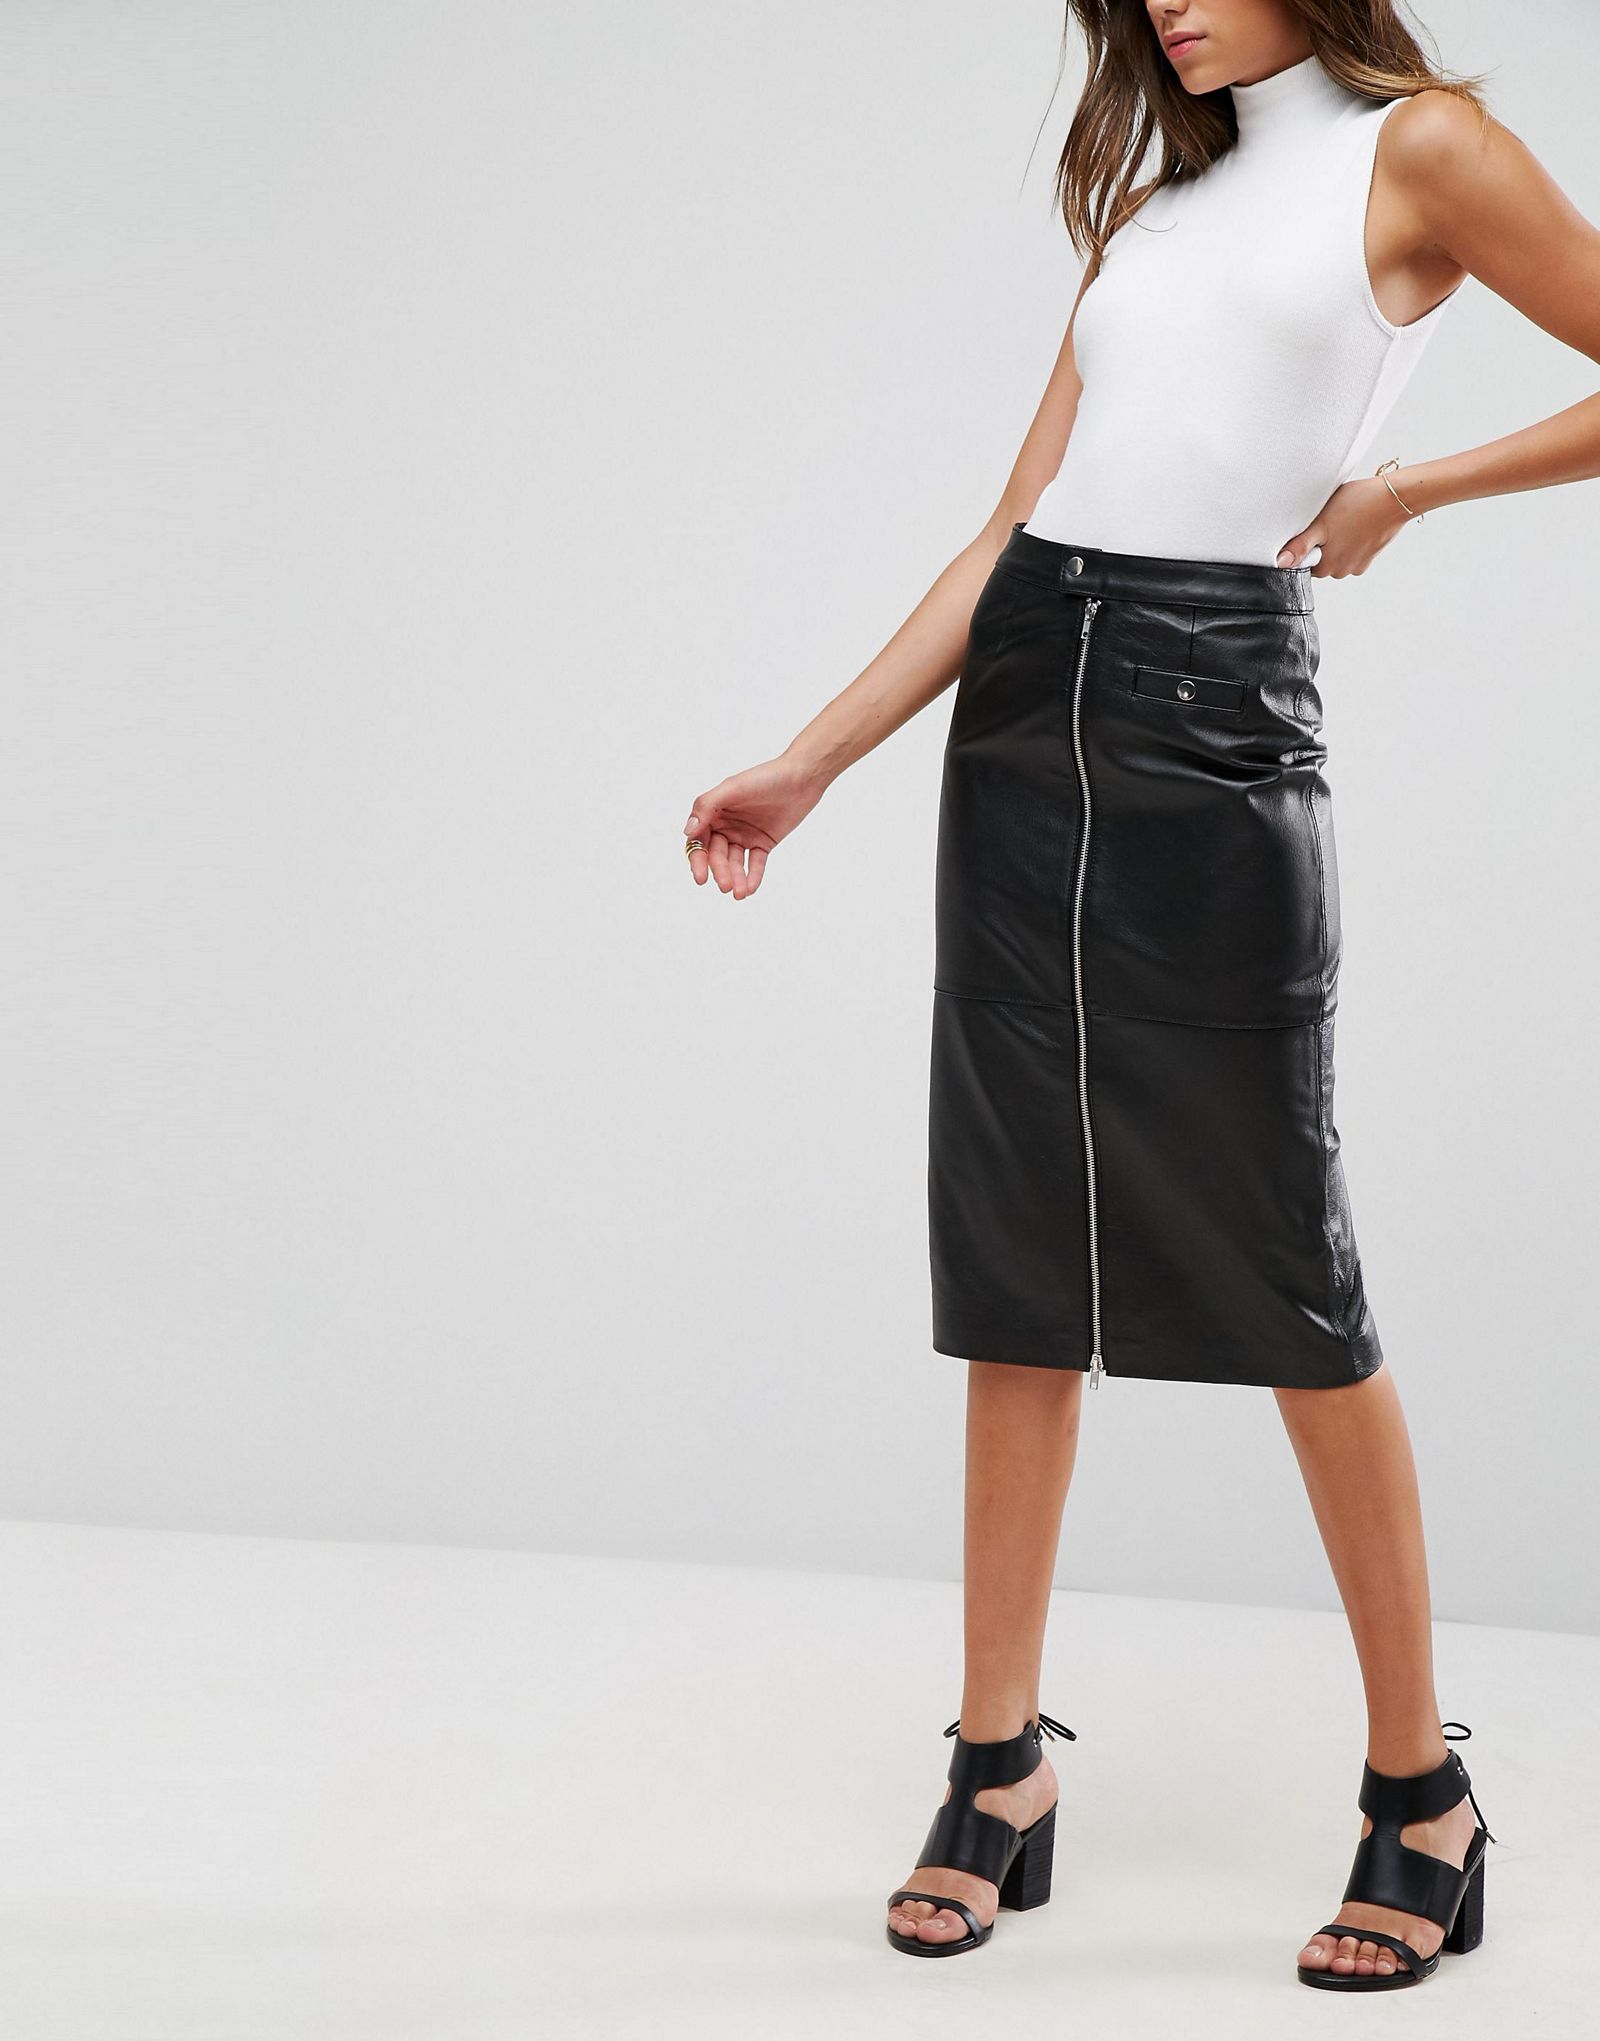 ASOS Leather Pencil Skirt with Zip Pocket Detail